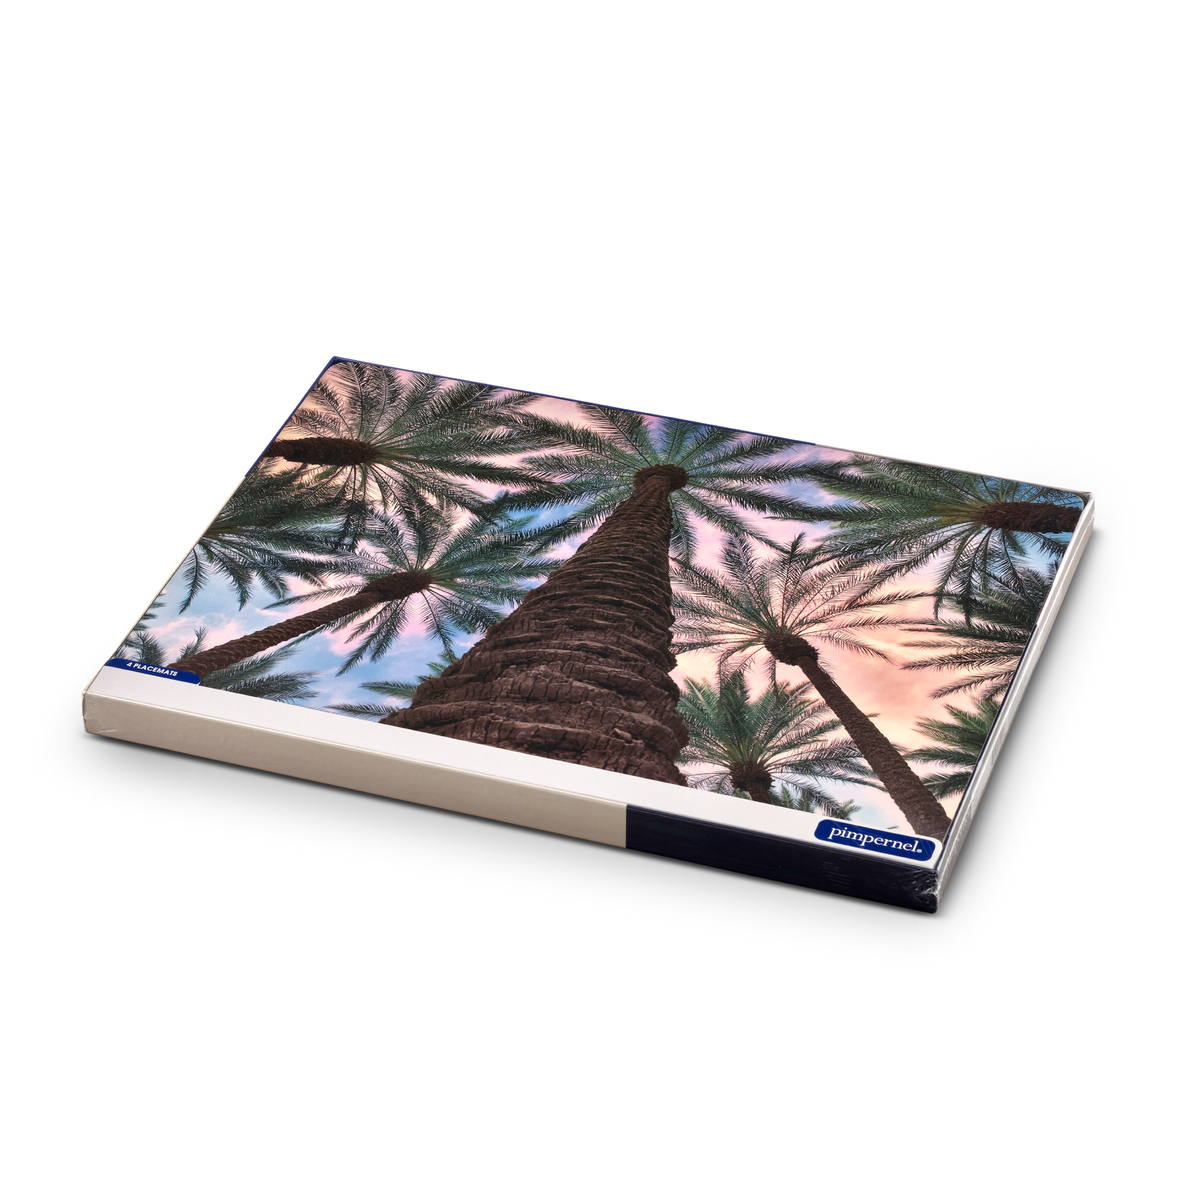 Pimpernel Tropical Placemats Set of 4 image number null